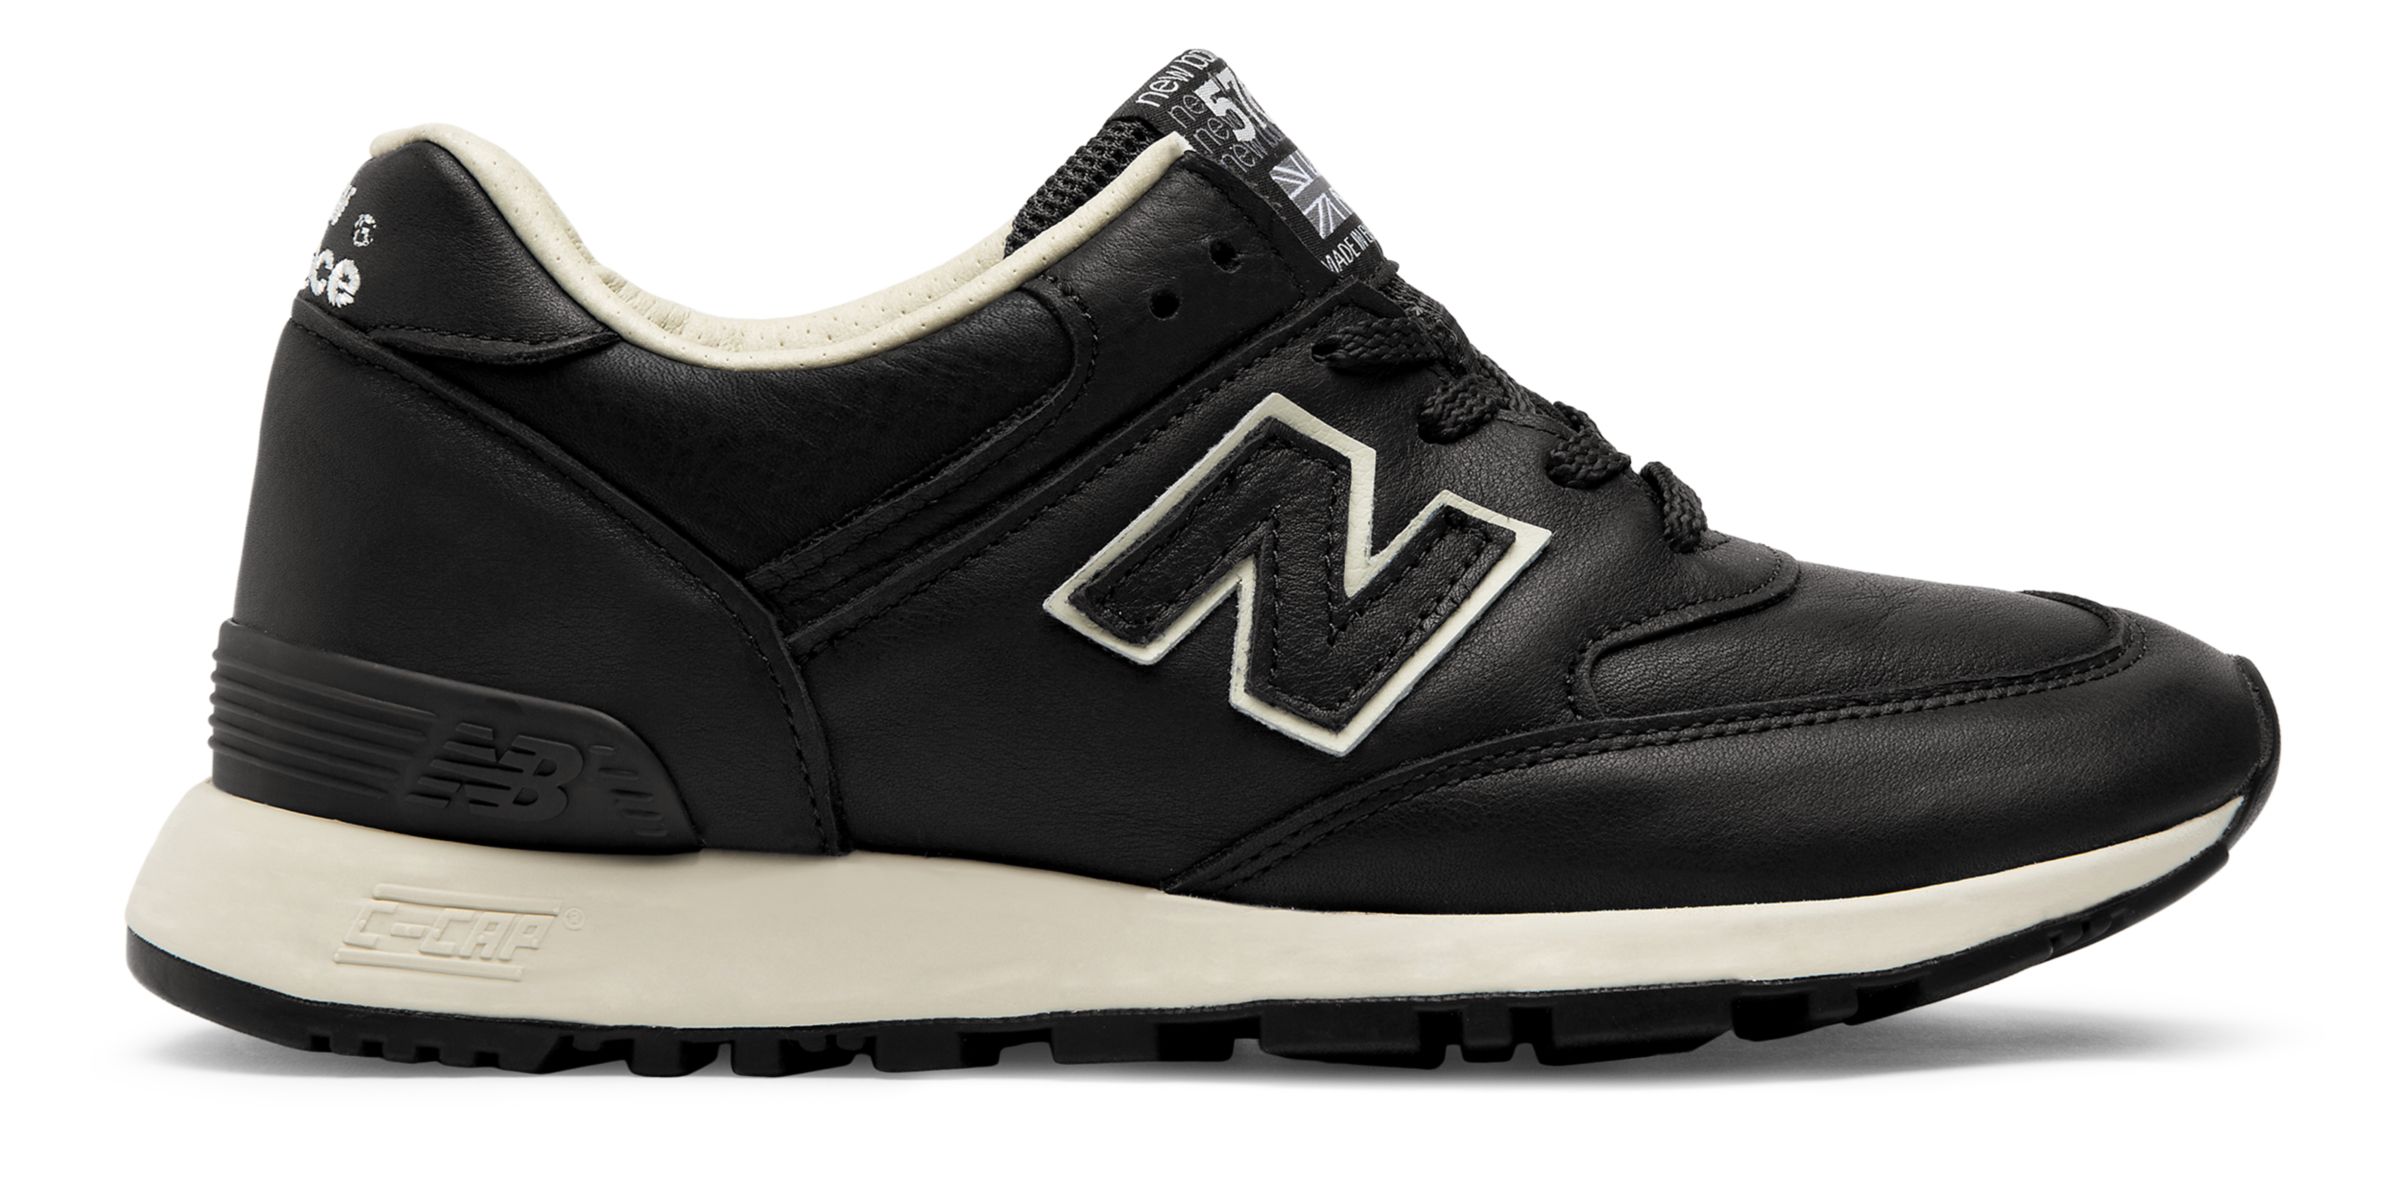 Women's 576 Made in UK Shoes - New Balance